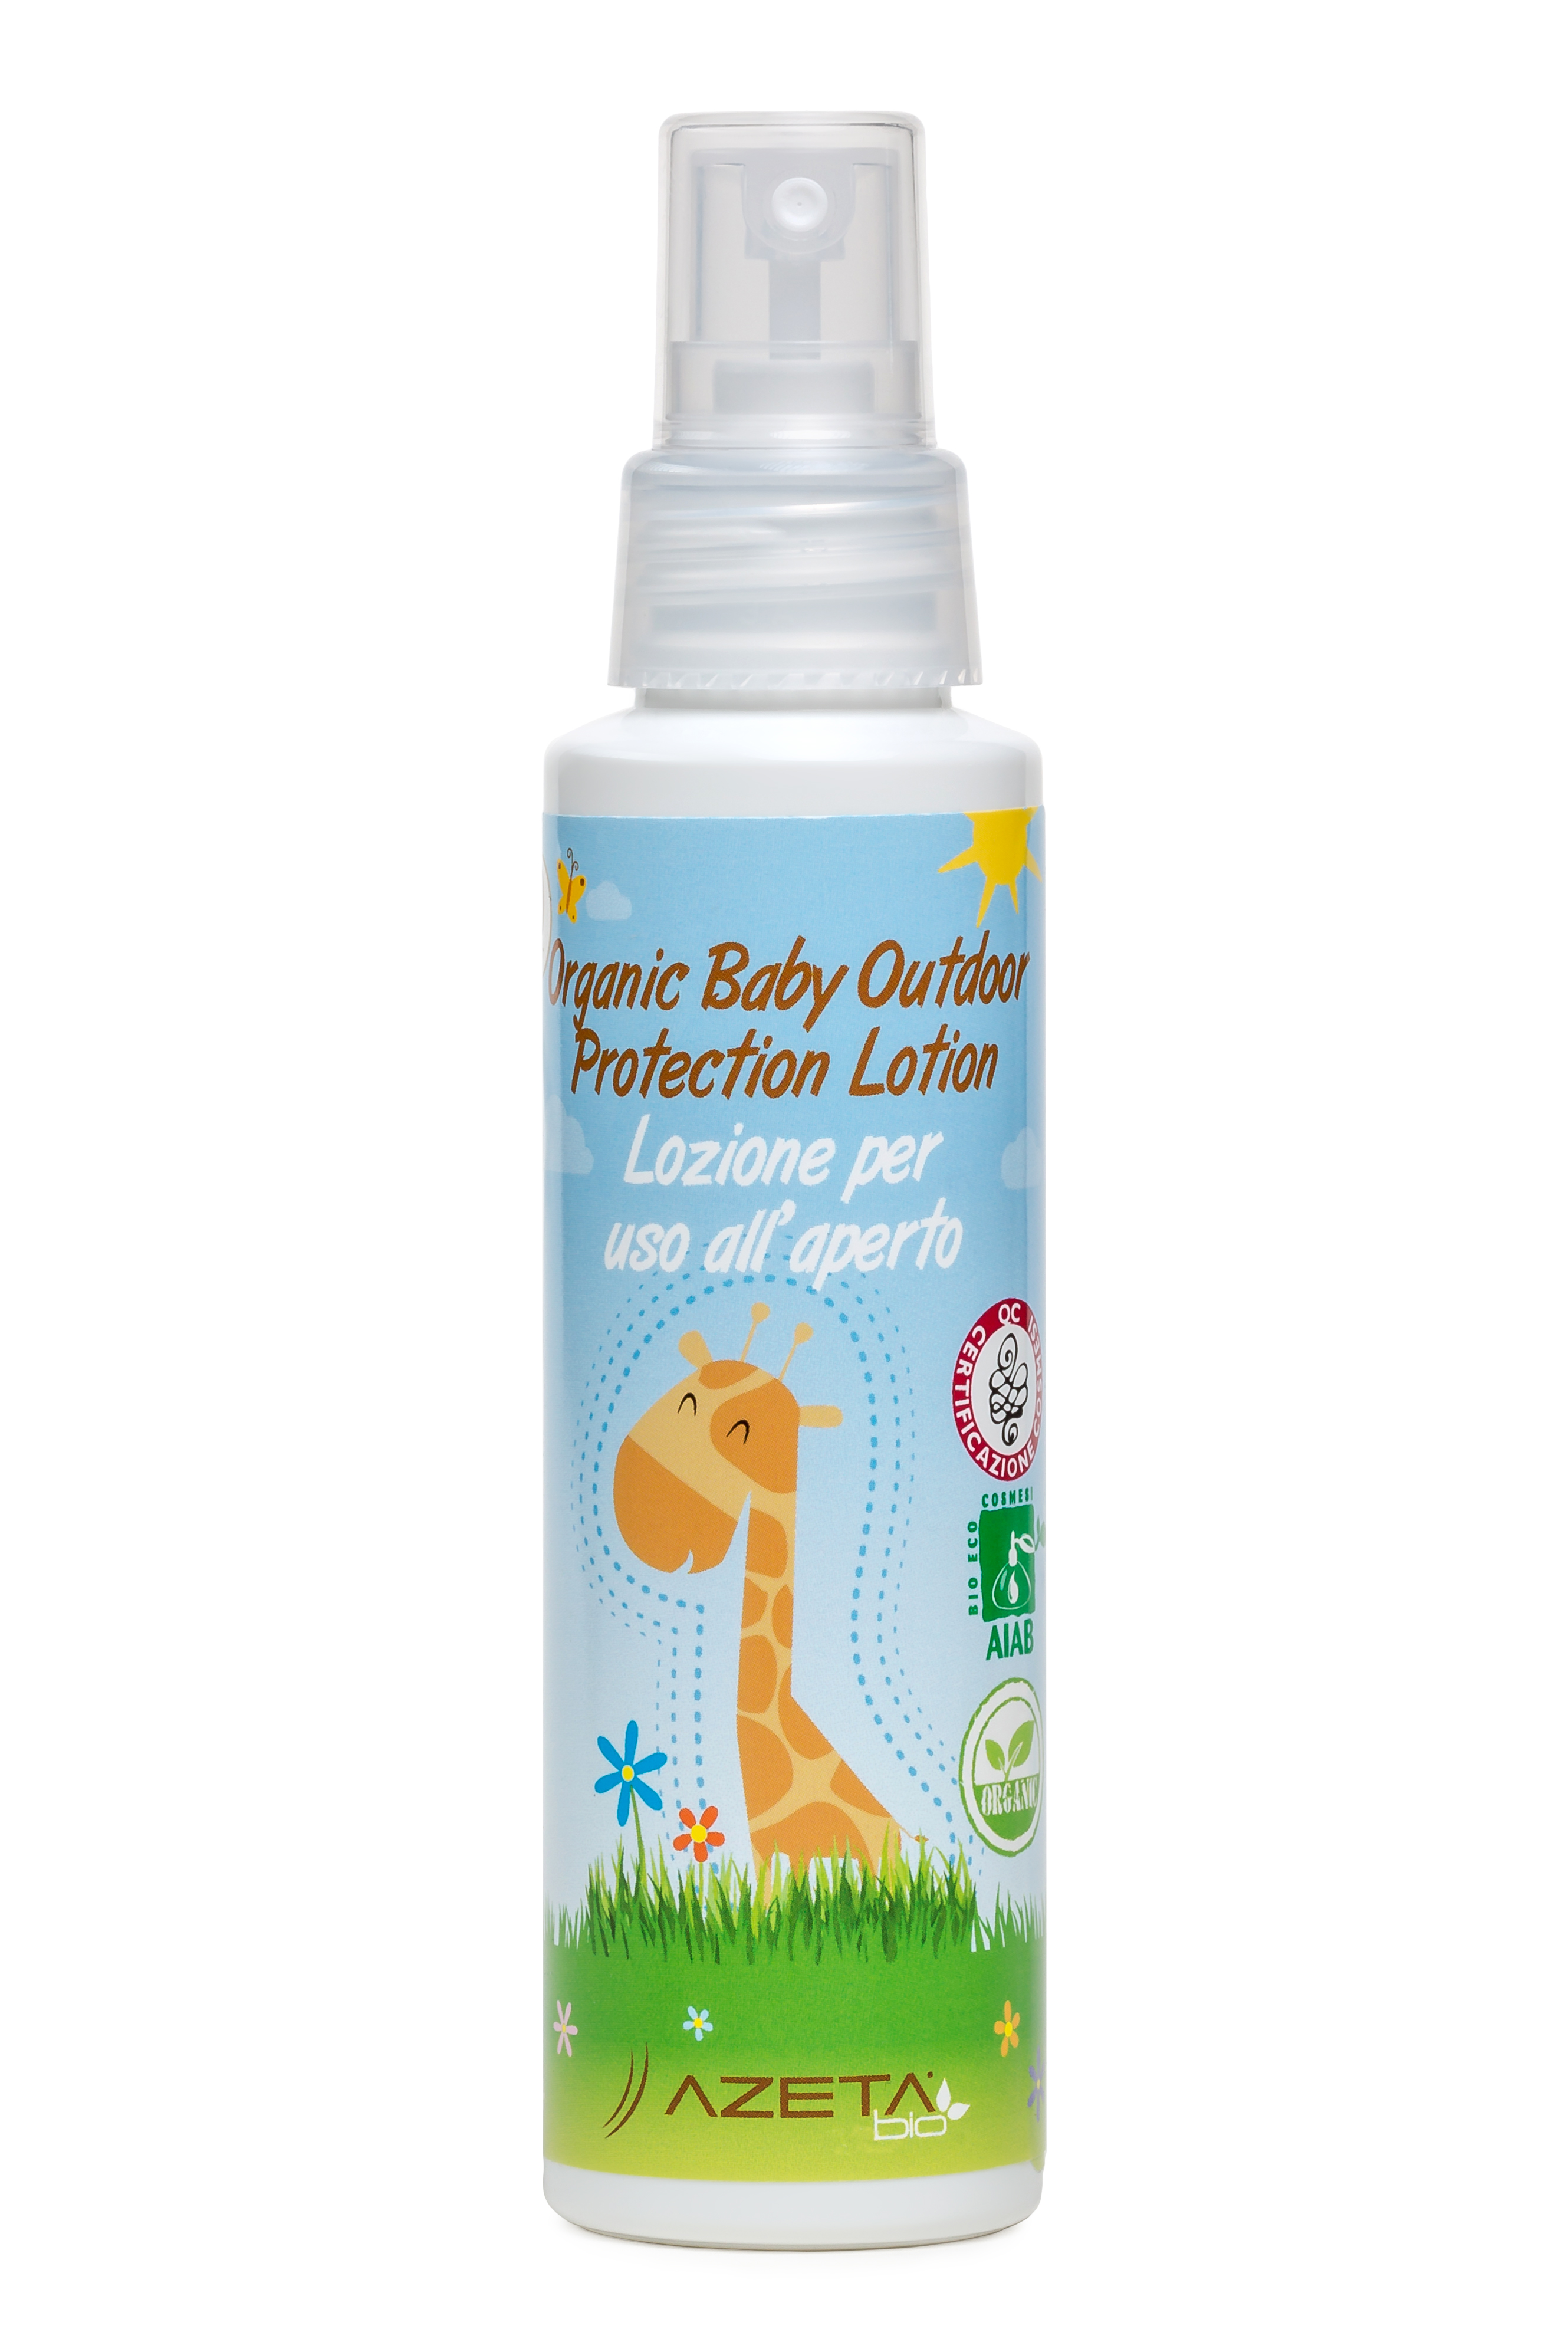 Baby outdoor potection lotion 100ml